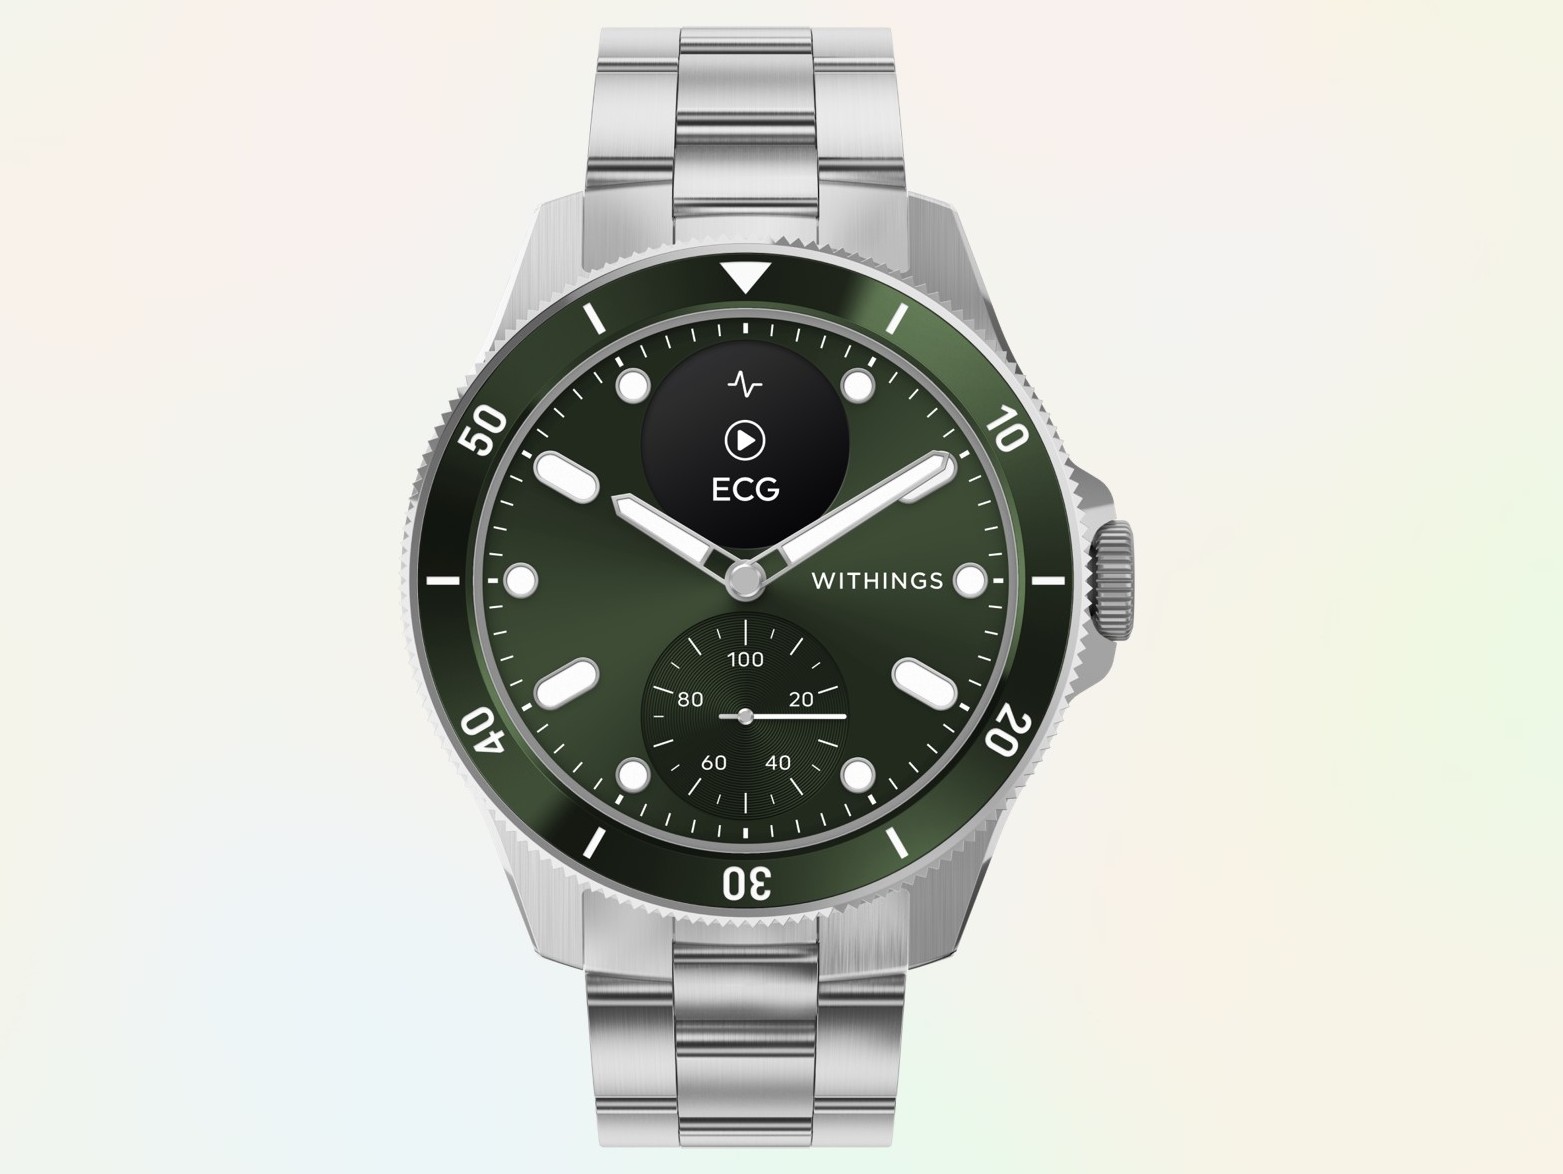 The 42mm Withings ScanWatch Nova Blends Luxury Diver Watch Aesthetics with Advanced Health Tracking Capabilities